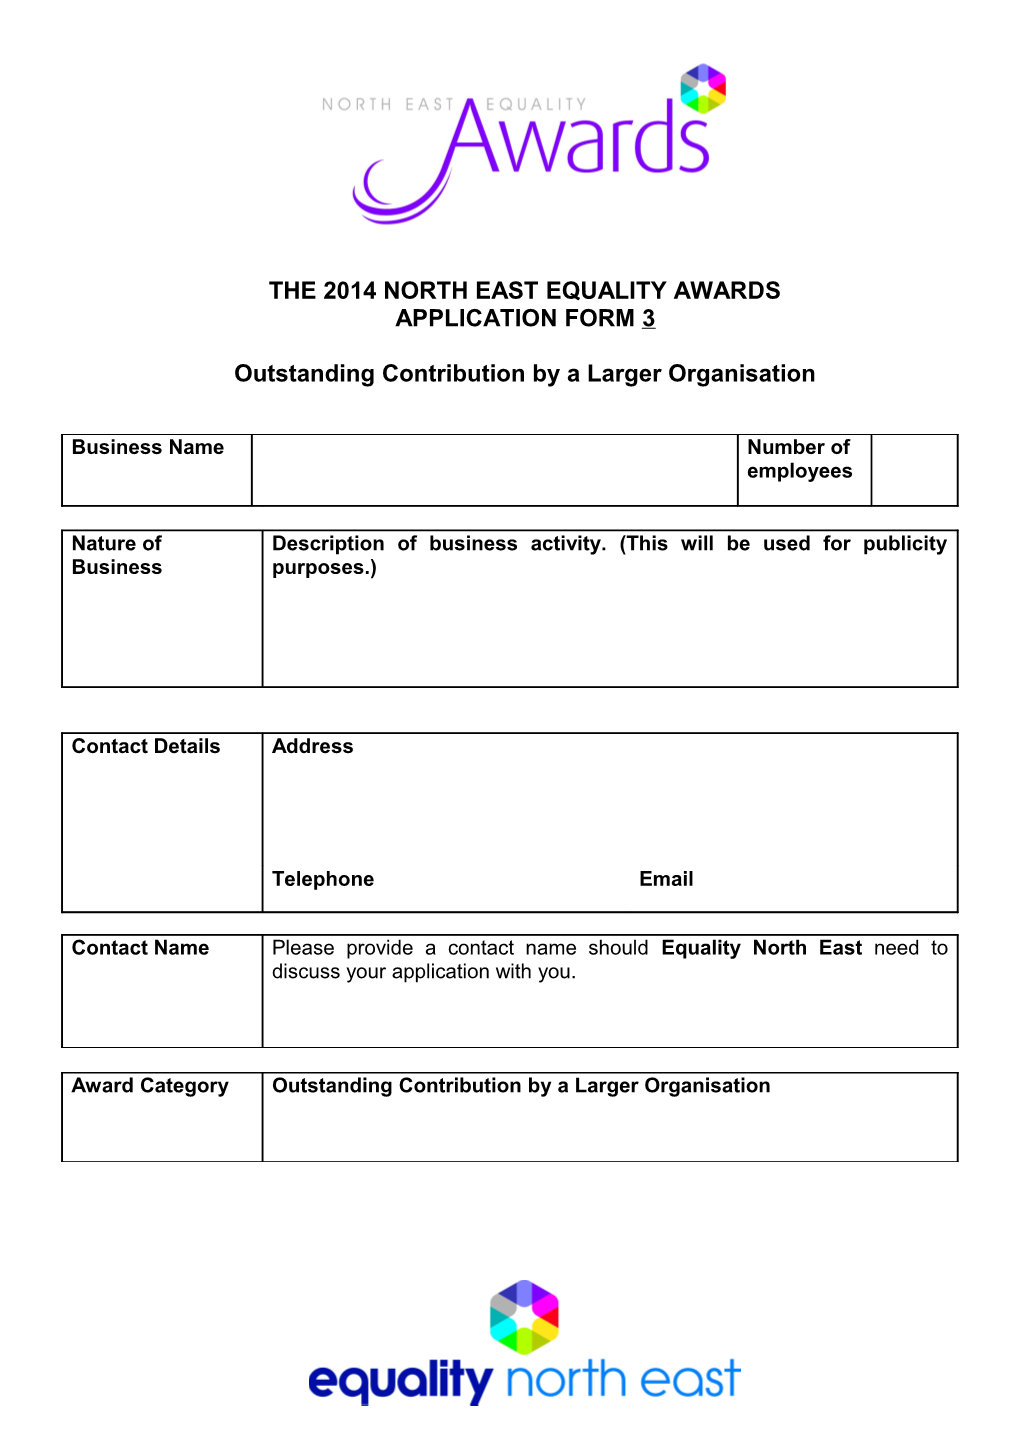 The 2014 North East Equality Awards